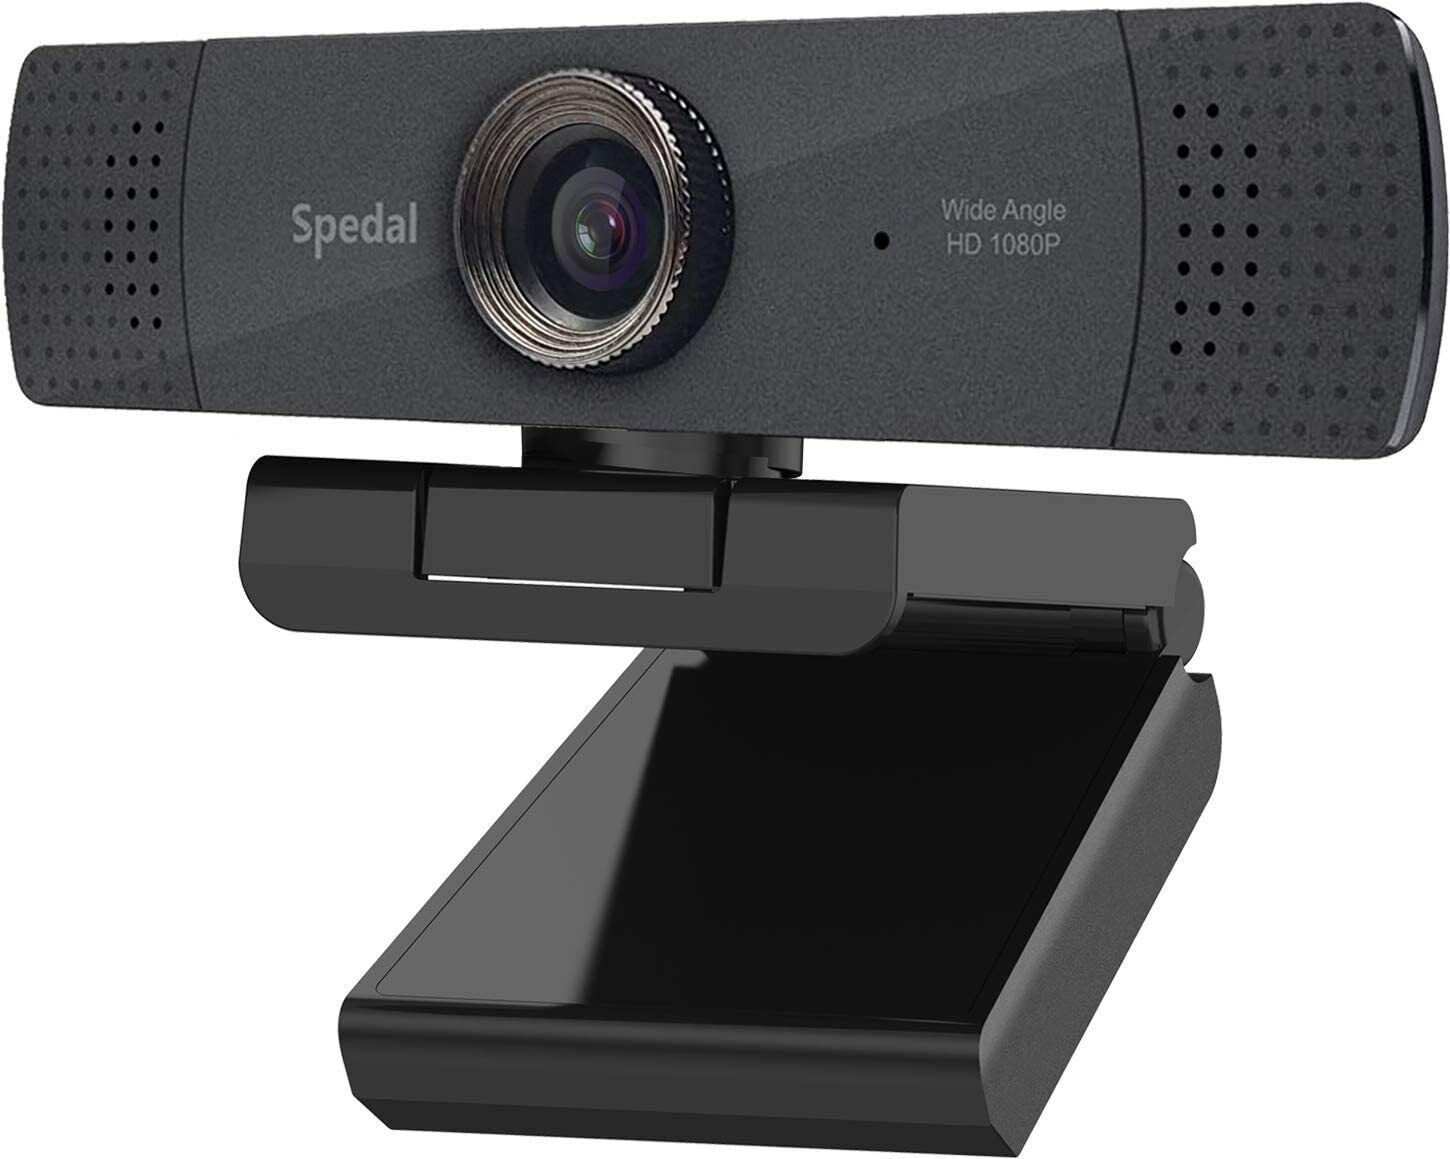 Spedal Stream Webcam FHD Product 1080P Streaming Pl Teaching Online Plug service